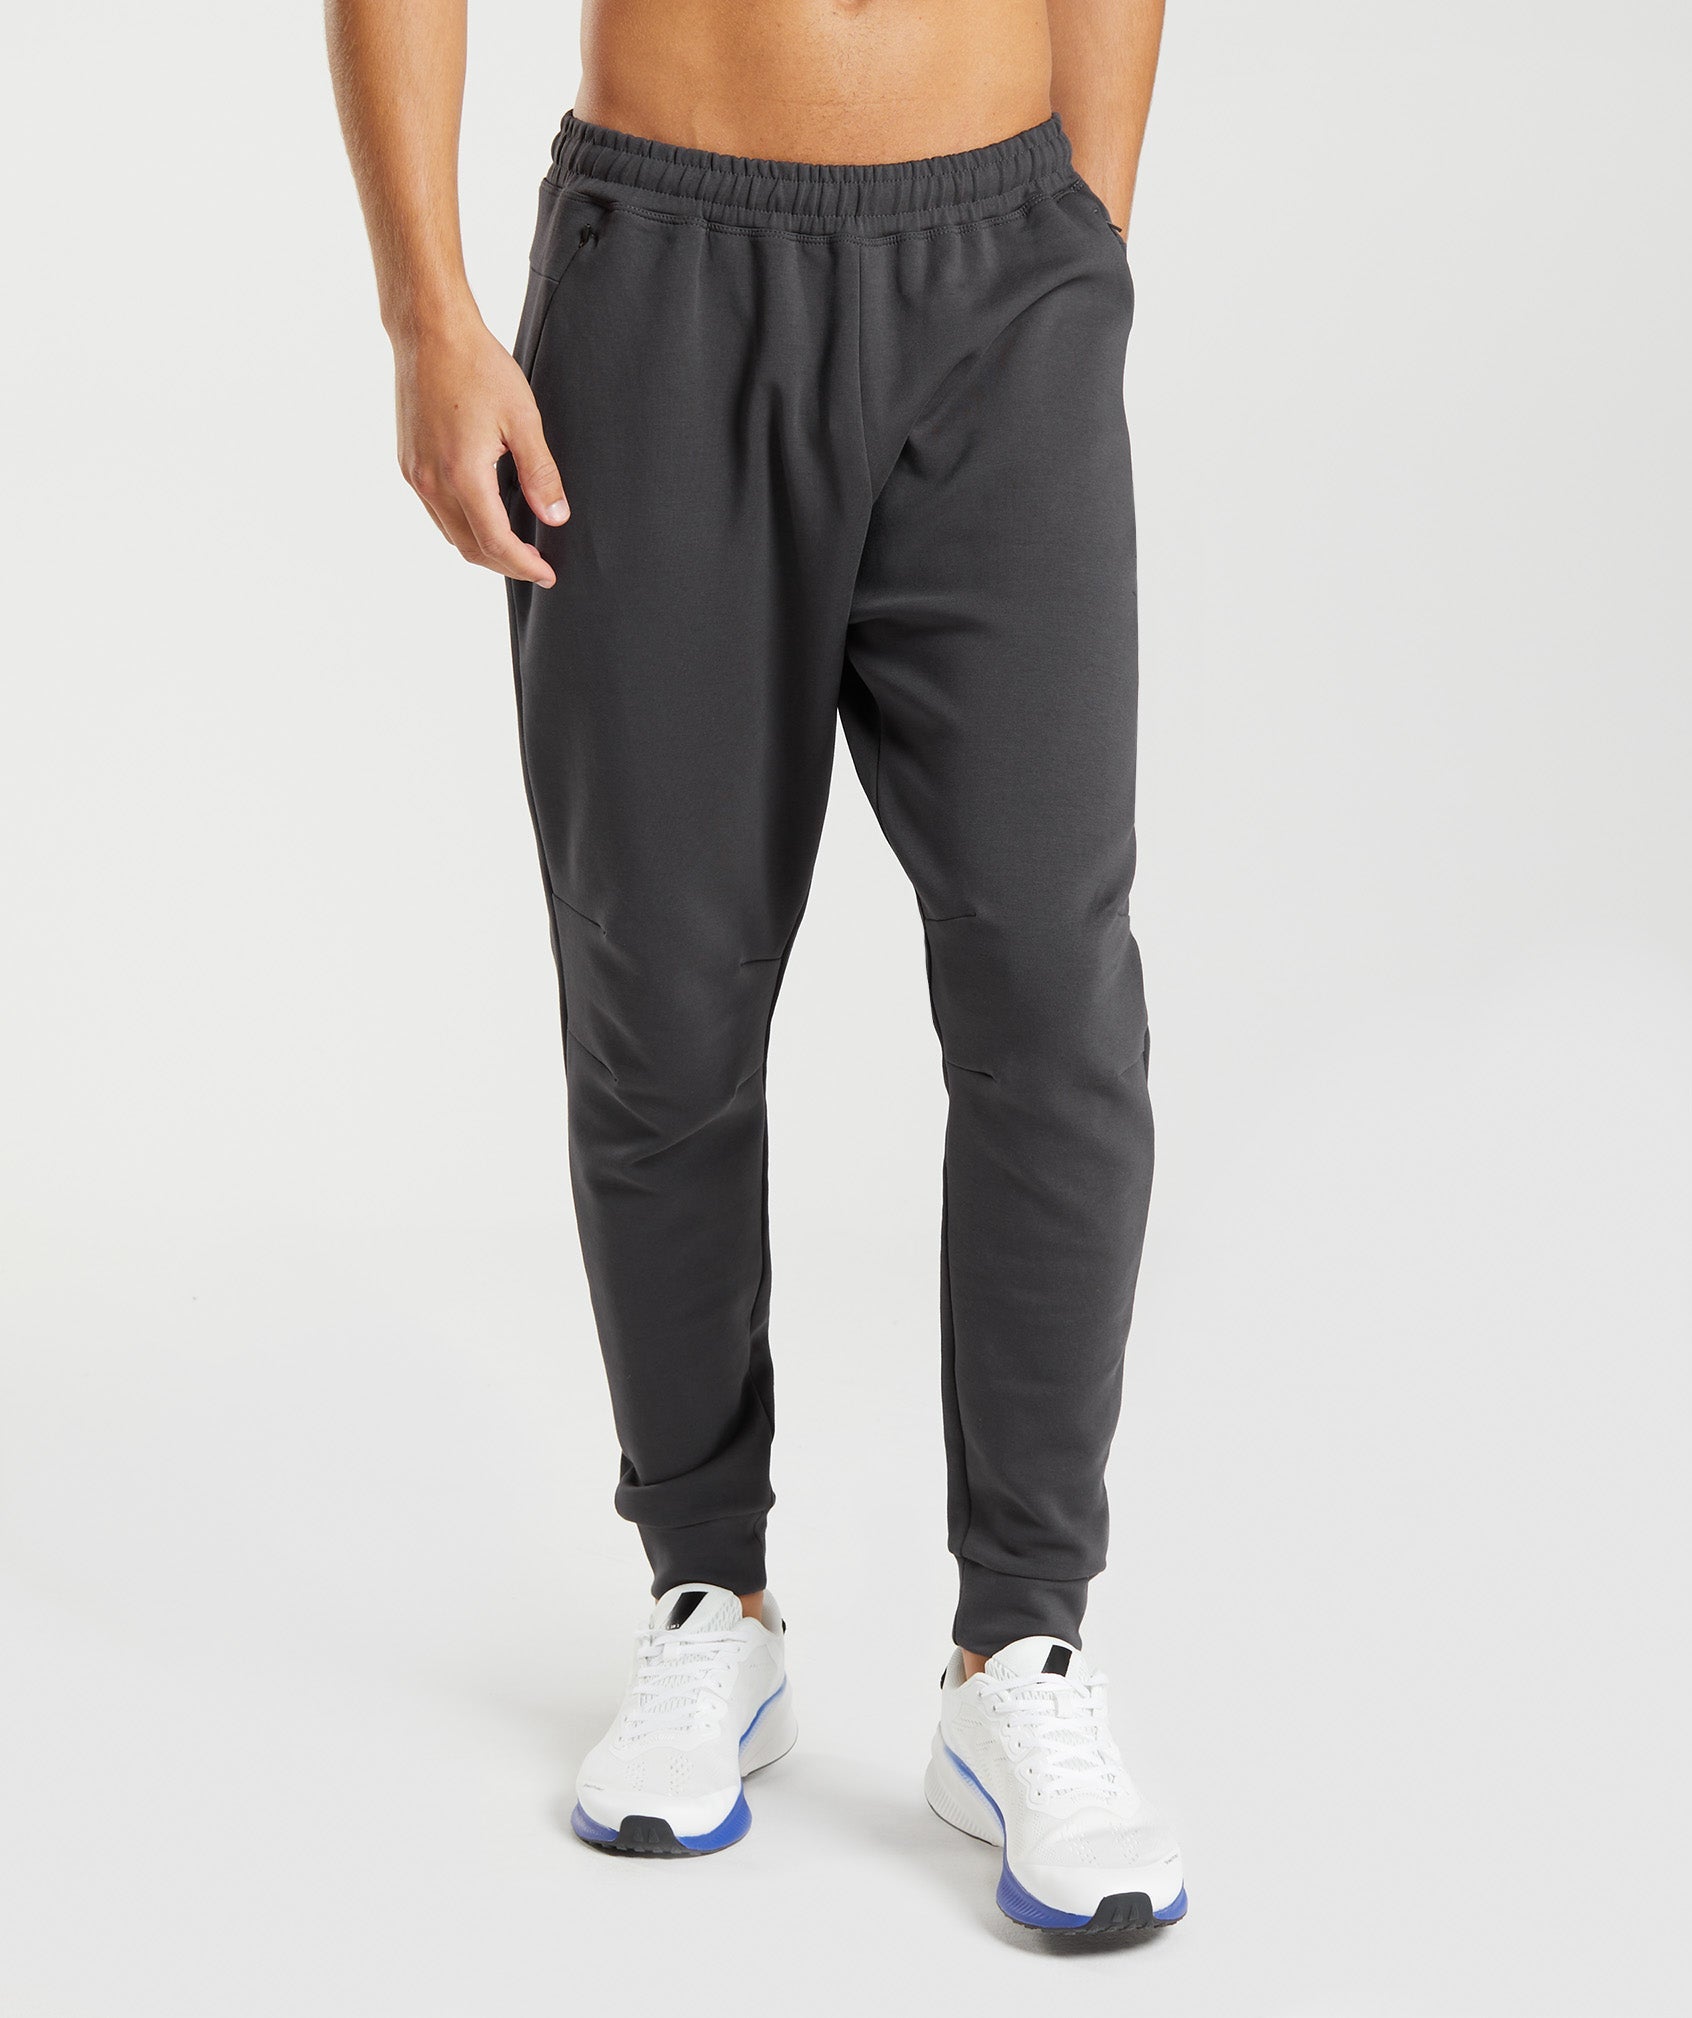 Day Joggers - Grey | Gymshark